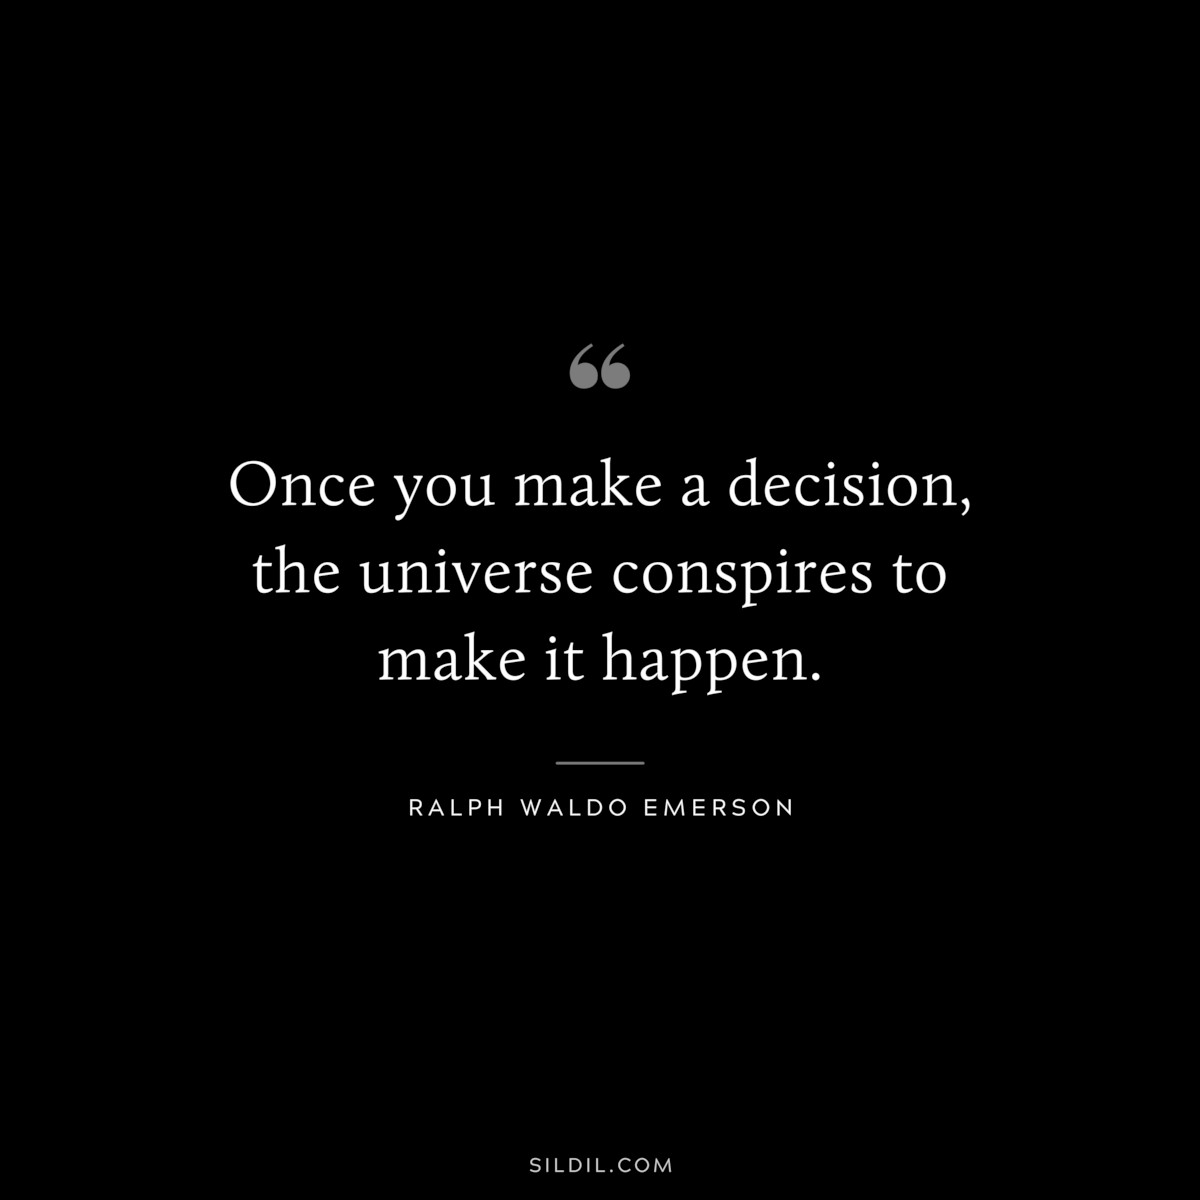 Once you make a decision, the universe conspires to make it happen. ― Ralph Waldo Emerson